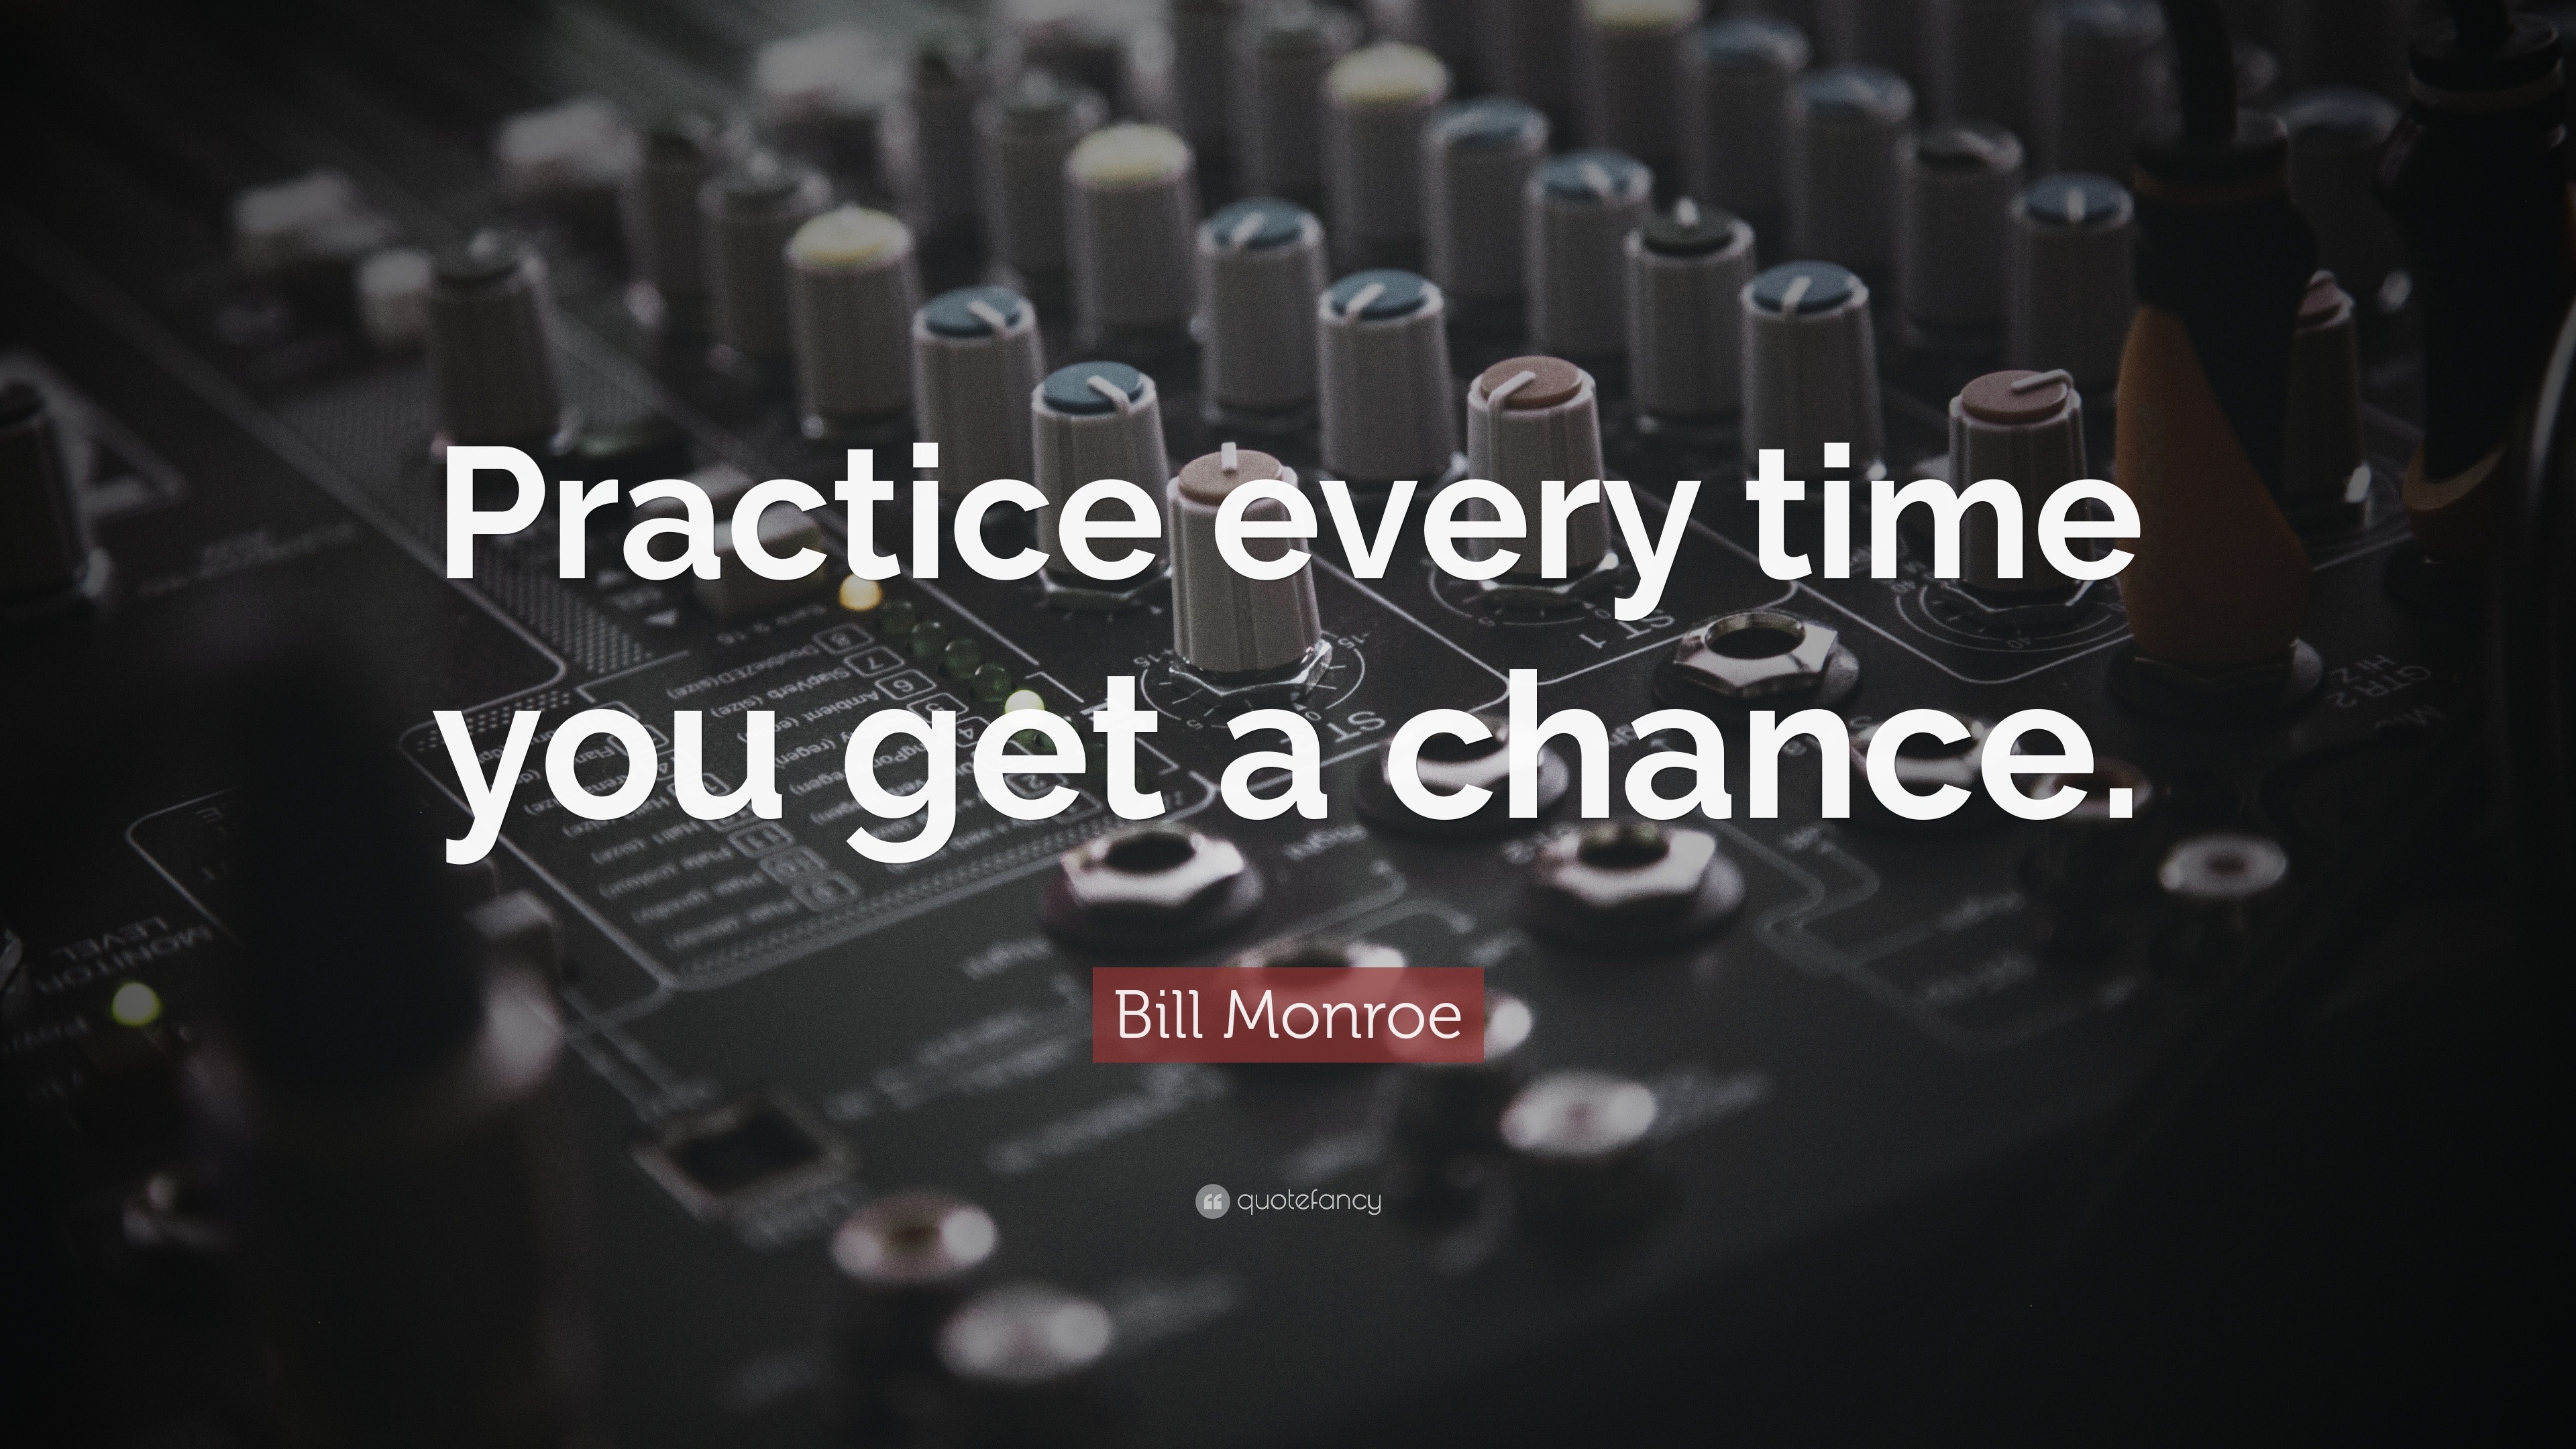 Bill Monroe Quote: “Practice every time you get a chance.”